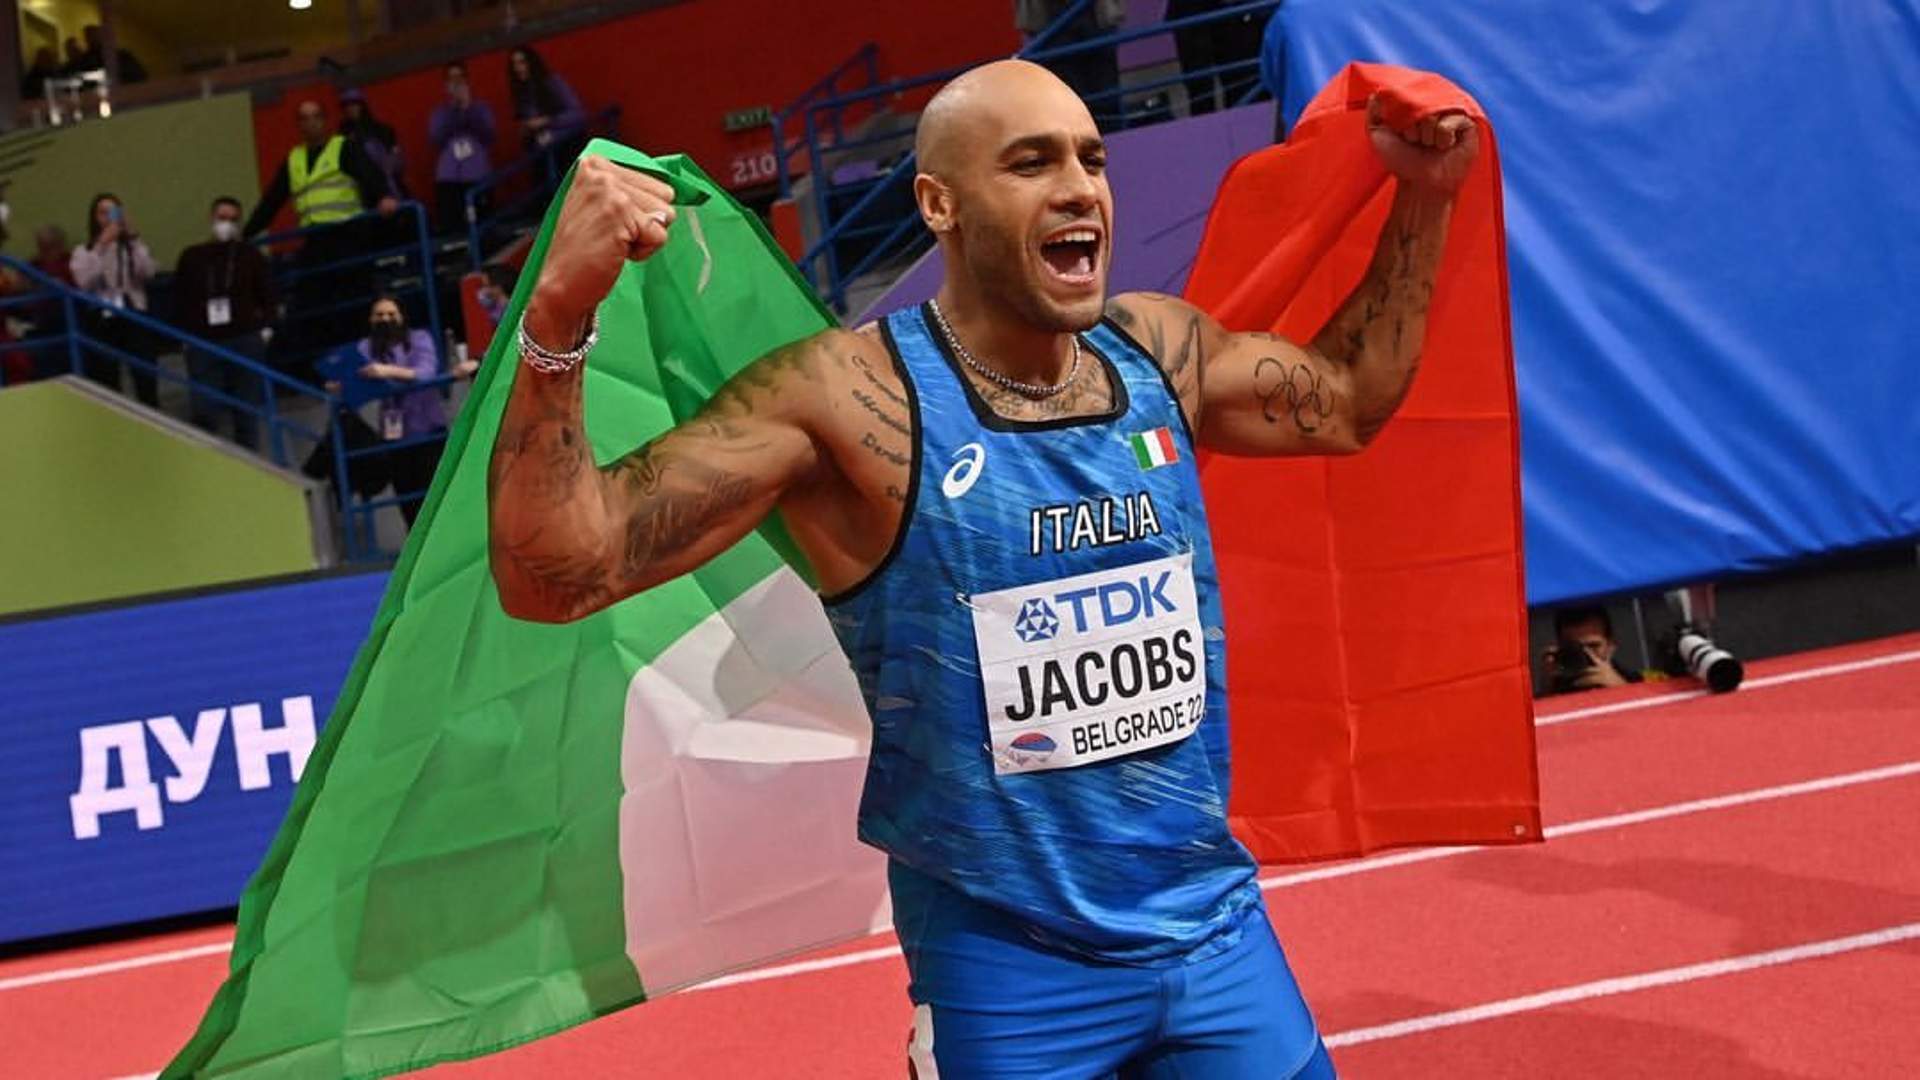 Marcell Jacobs after becoming the World Indoors champion in Belgrade (Image Credits - Instagram/@crazylongjumper)